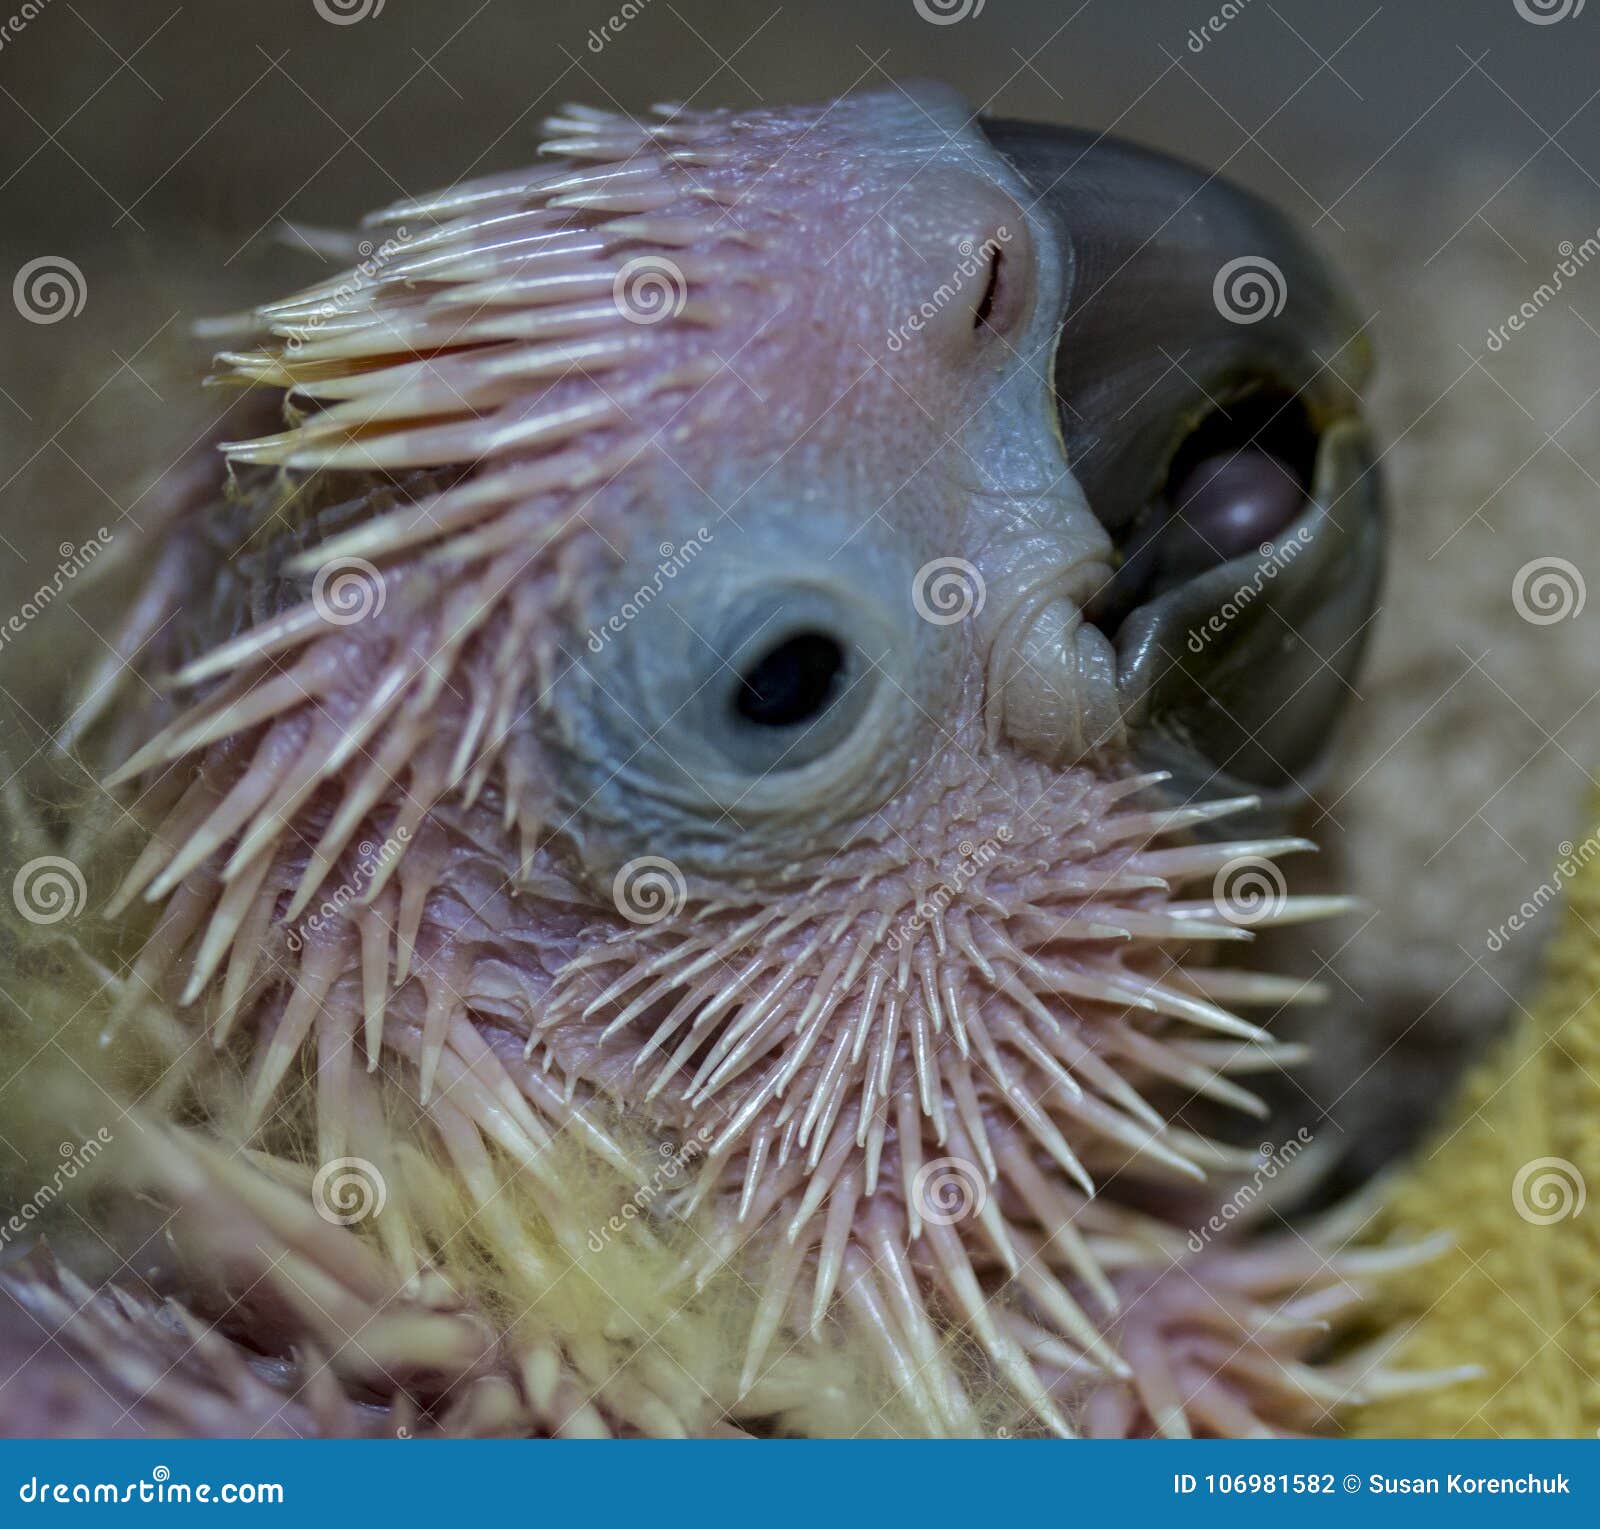 baby-cockatoo-face-pin-feathers-close-up-shot-cockatoos-head-showing-106981582.jpg